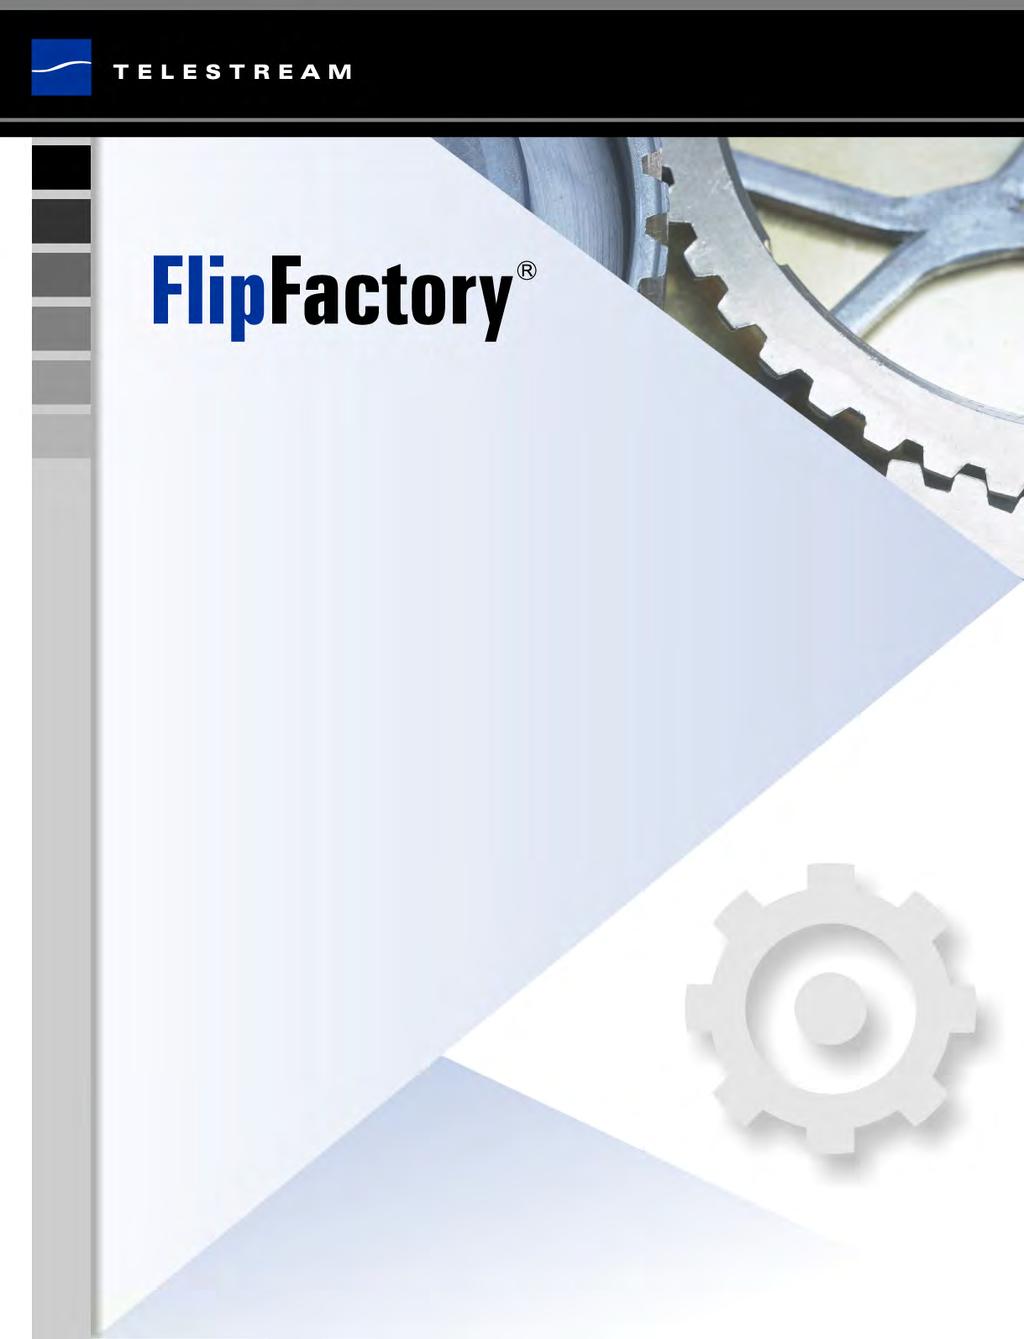 A PP NOTE PROCESSING DPX FILES IN FLIPFACTORY WORKFLOWS Introduction...2 Processing DPX Files in FlipFactory...2 Manually Submitting DPX Jobs...3 Creating a Custom App to Submit DPX Jobs.